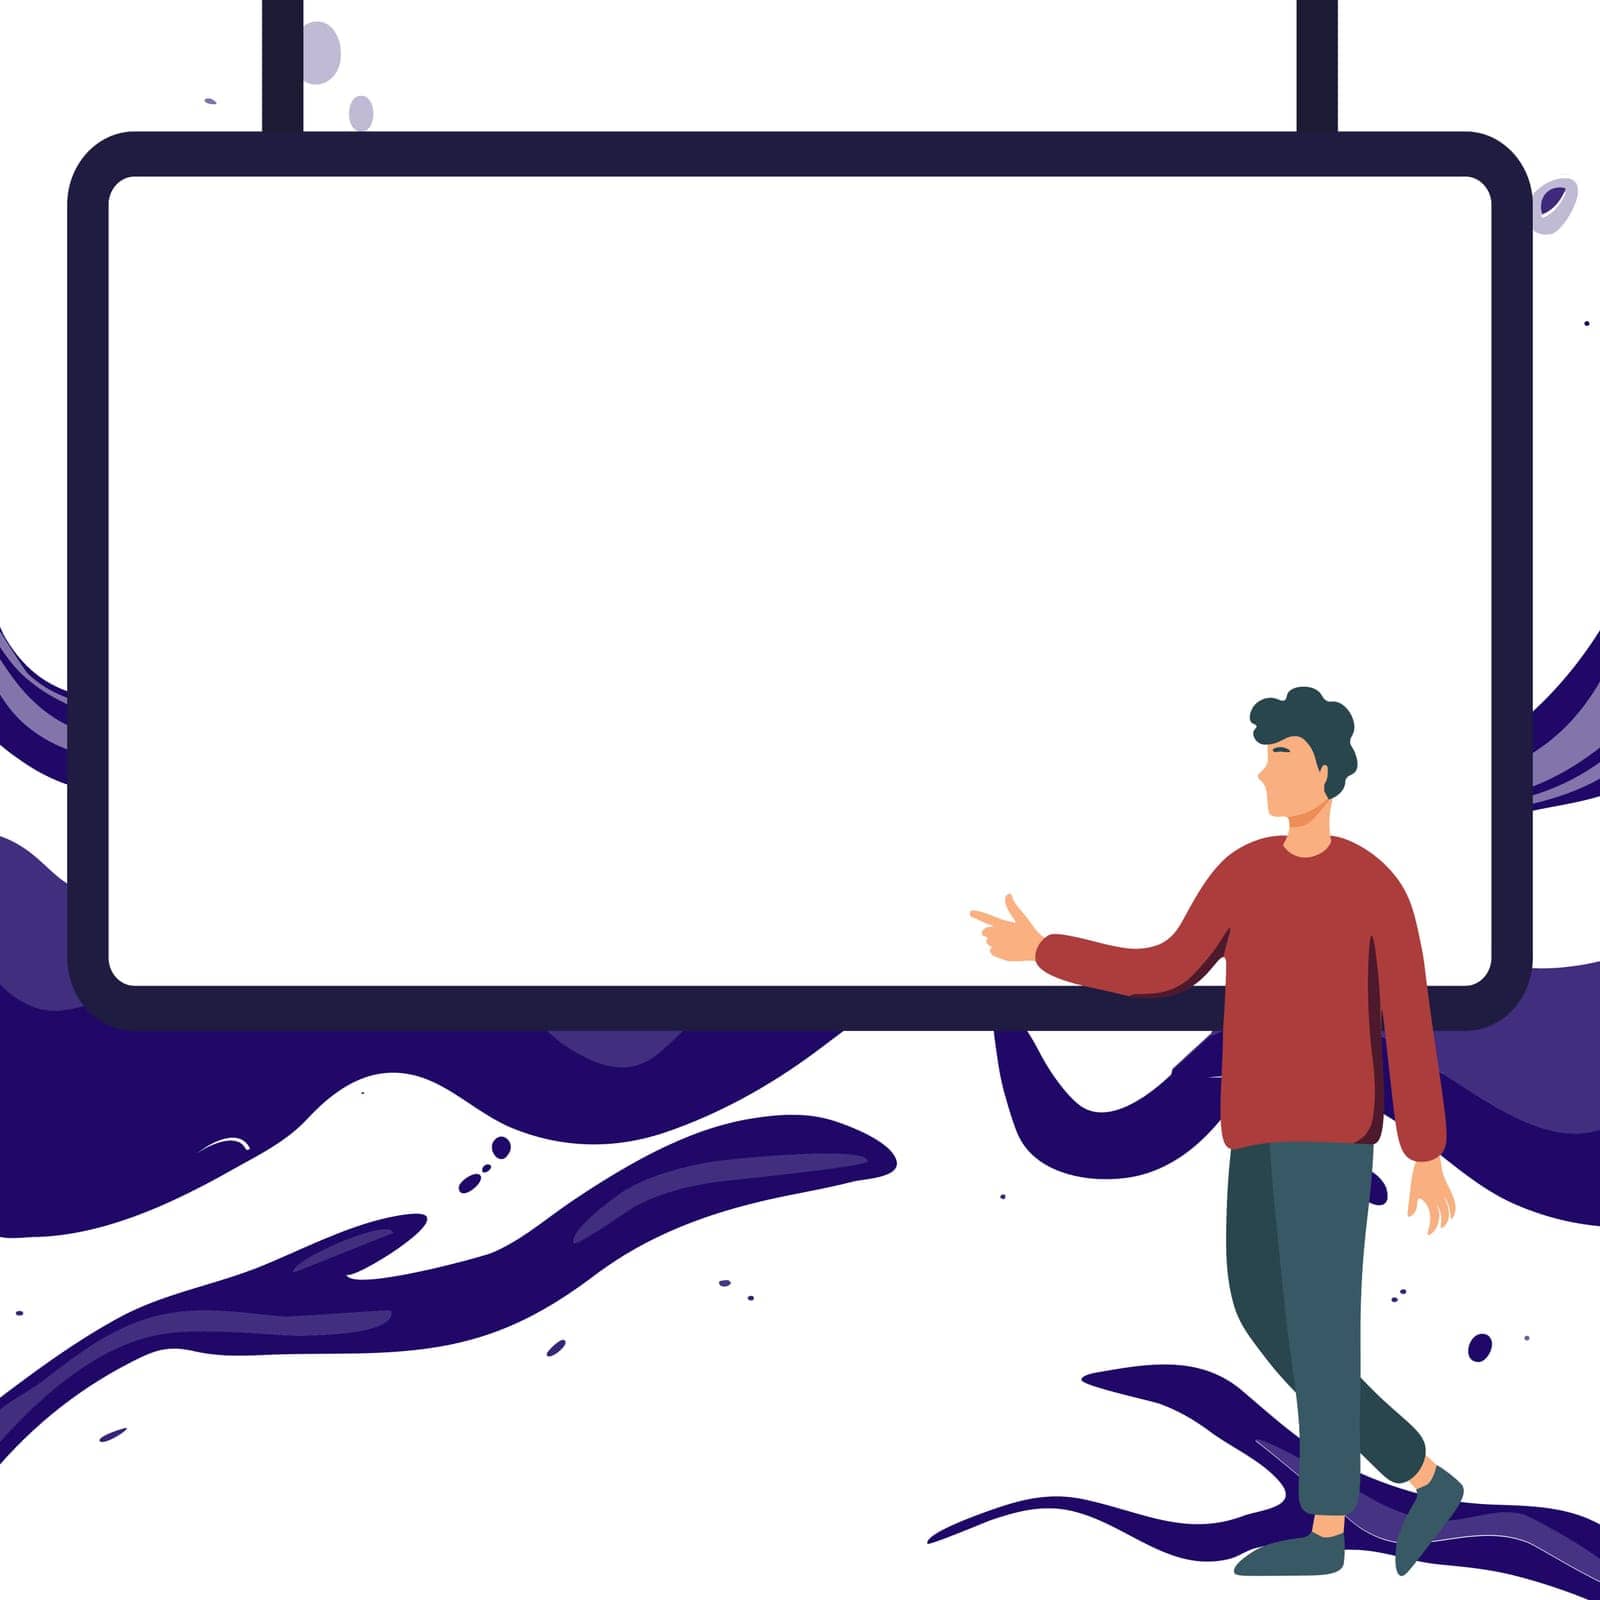 Presentator shows important information on whiteboard. Man show main message written over big text holder. Finger pointing to table with words. by nialowwa